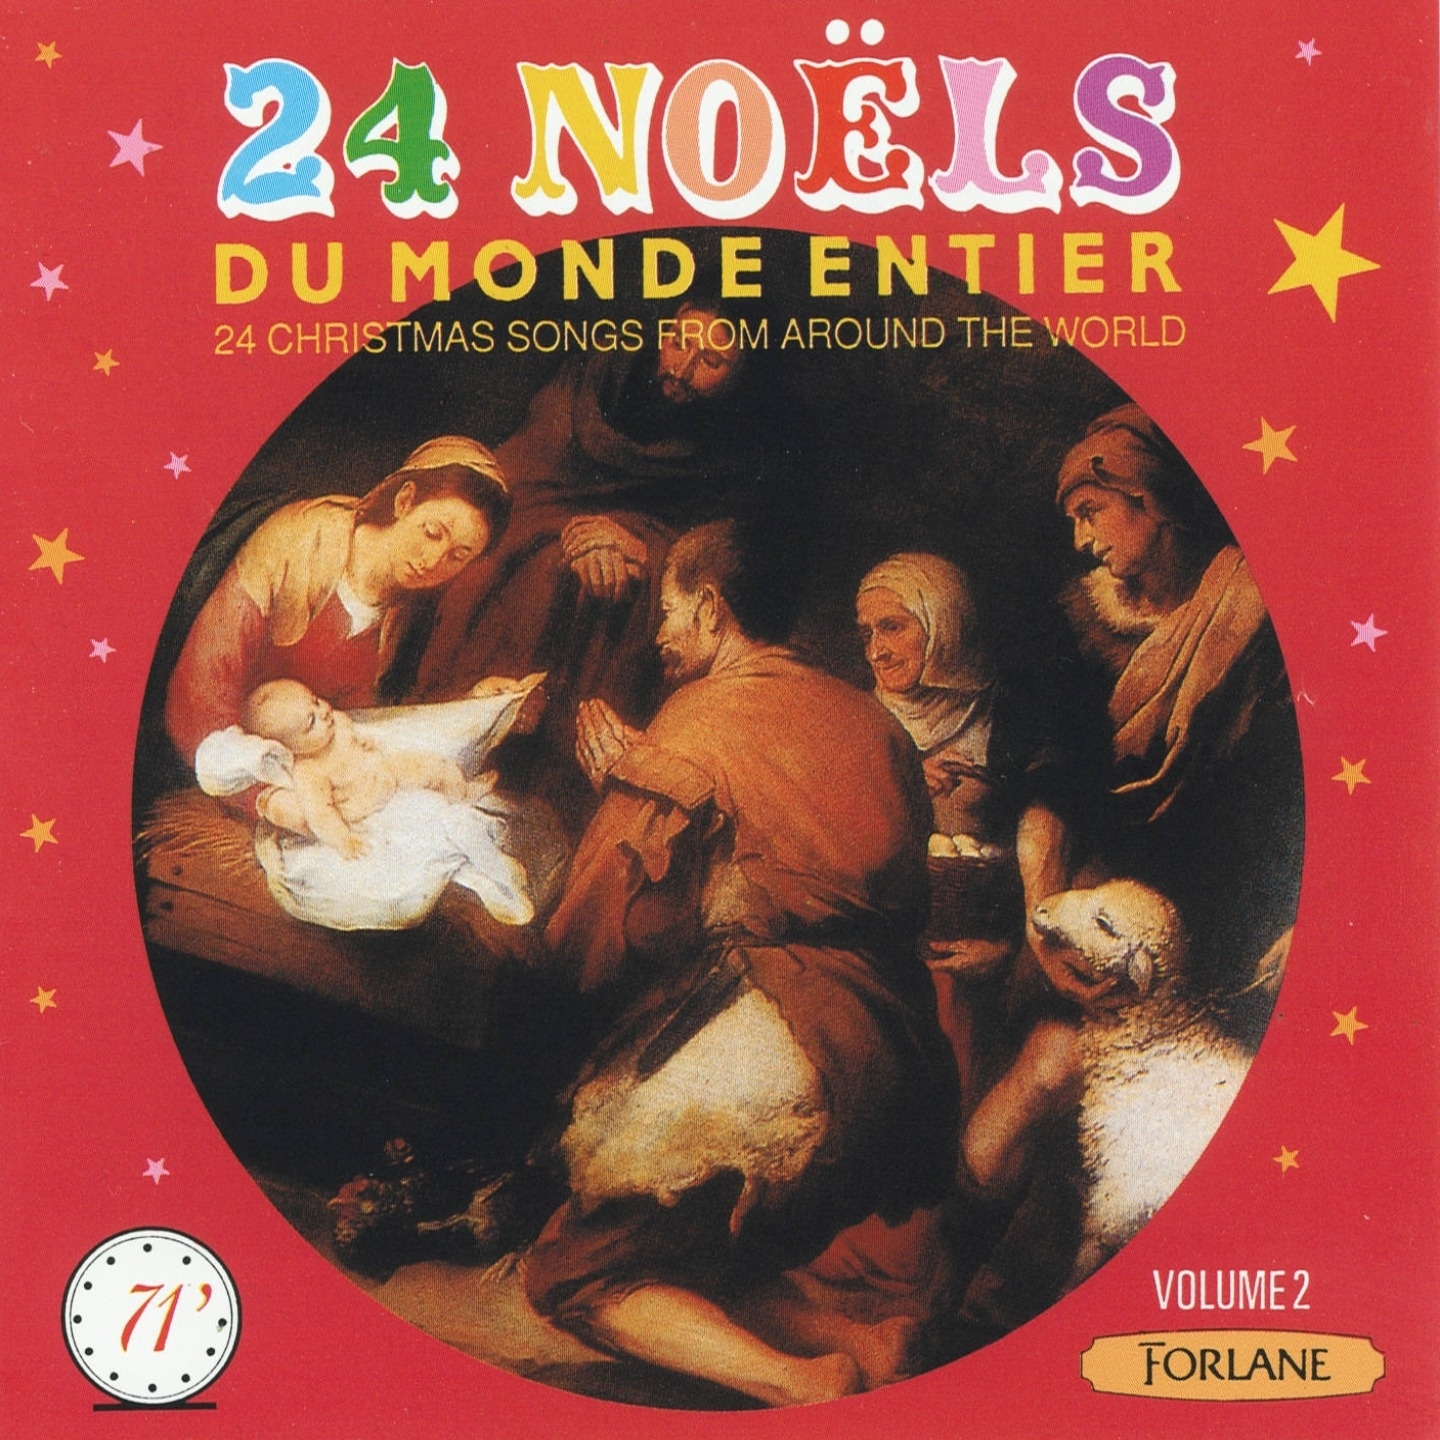 24 No ls du monde entier 24 Christmas Songs from Around the World